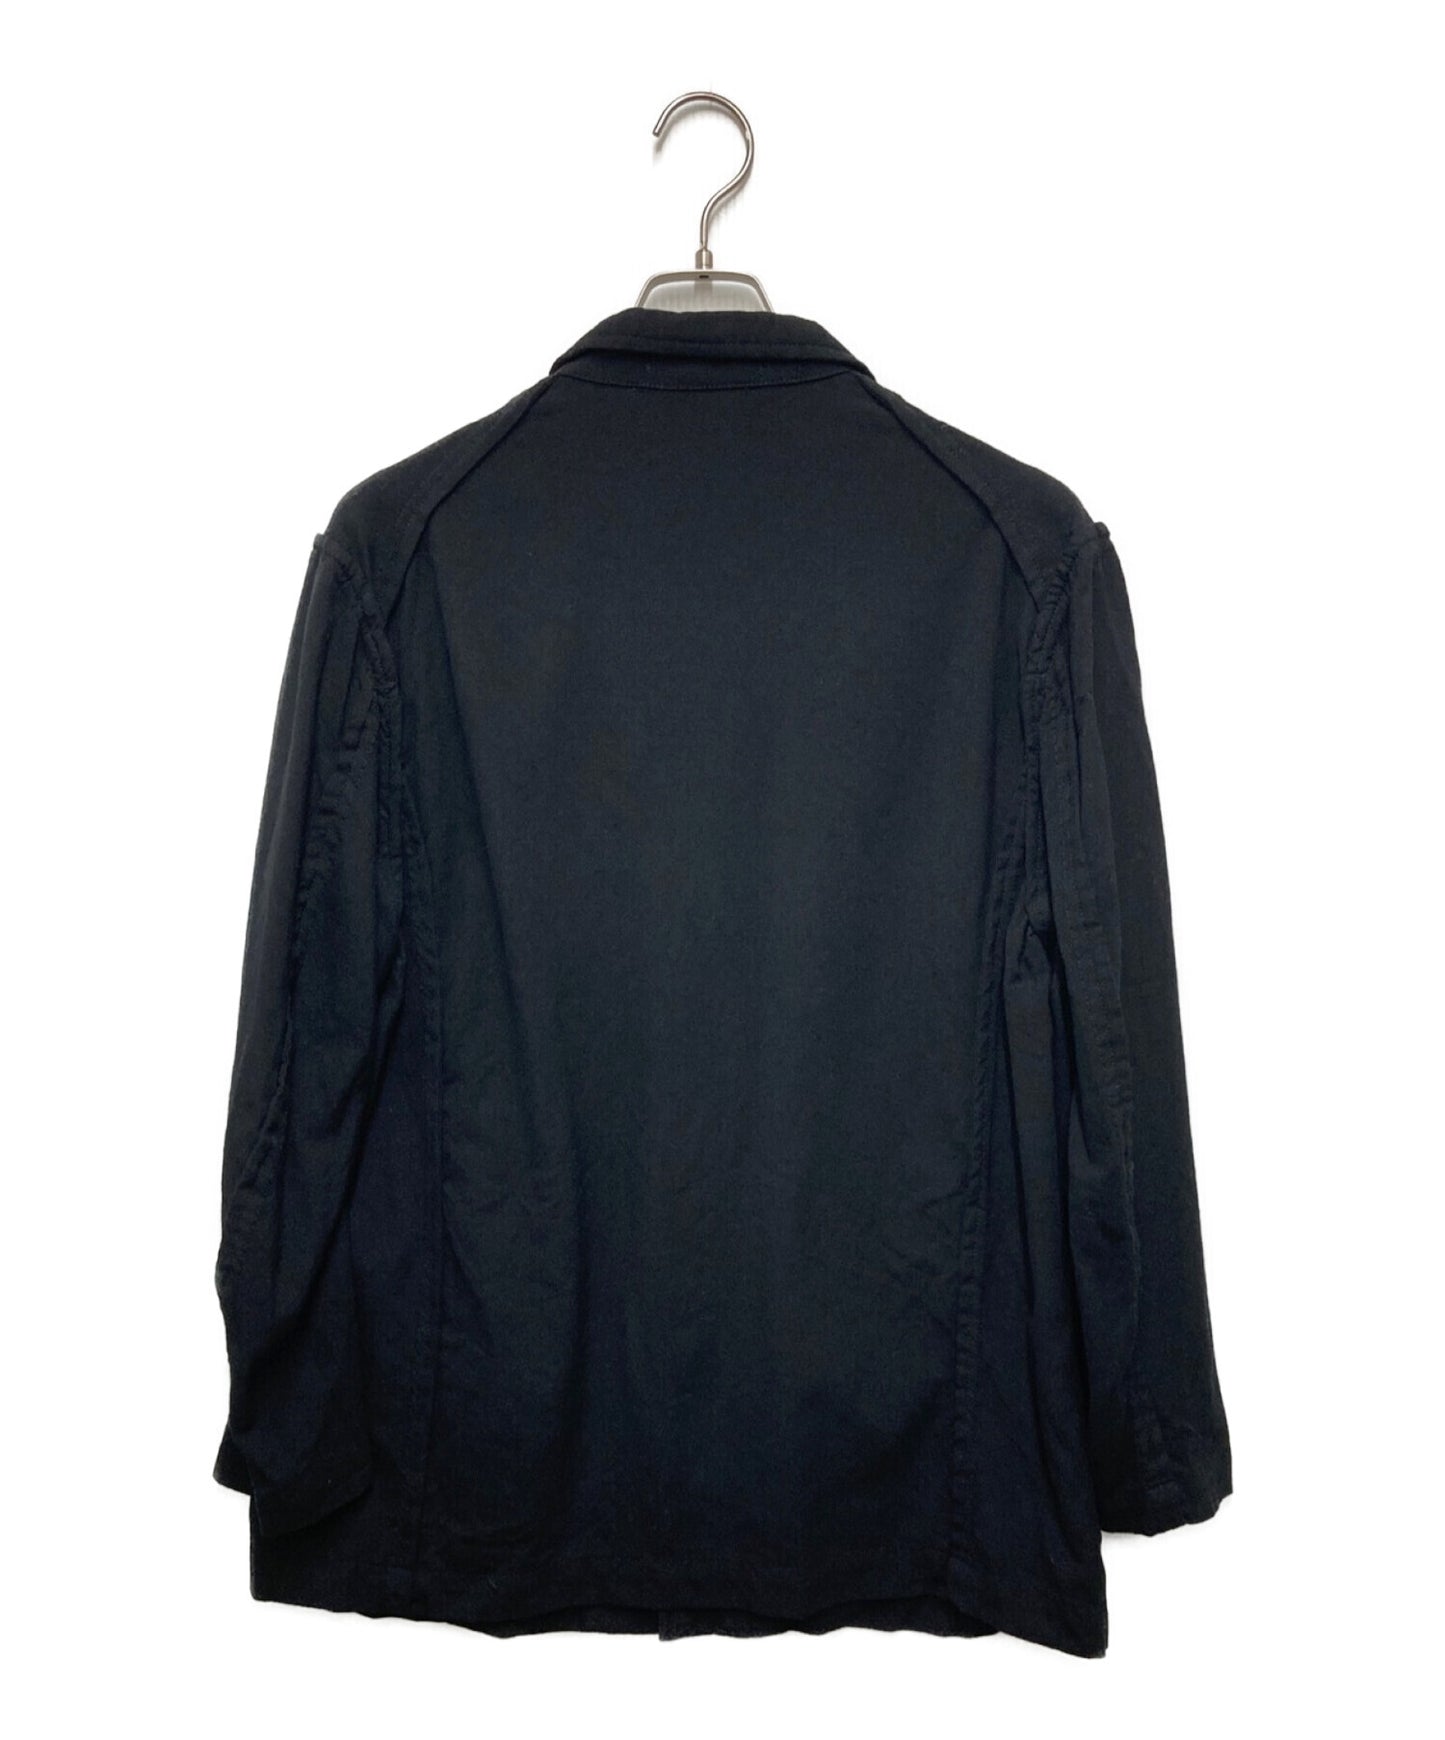 COMME des GARCONS HOMME PLUS Inside-out seam jacket 1998AW Inside-outside period Archive PJ-04019S